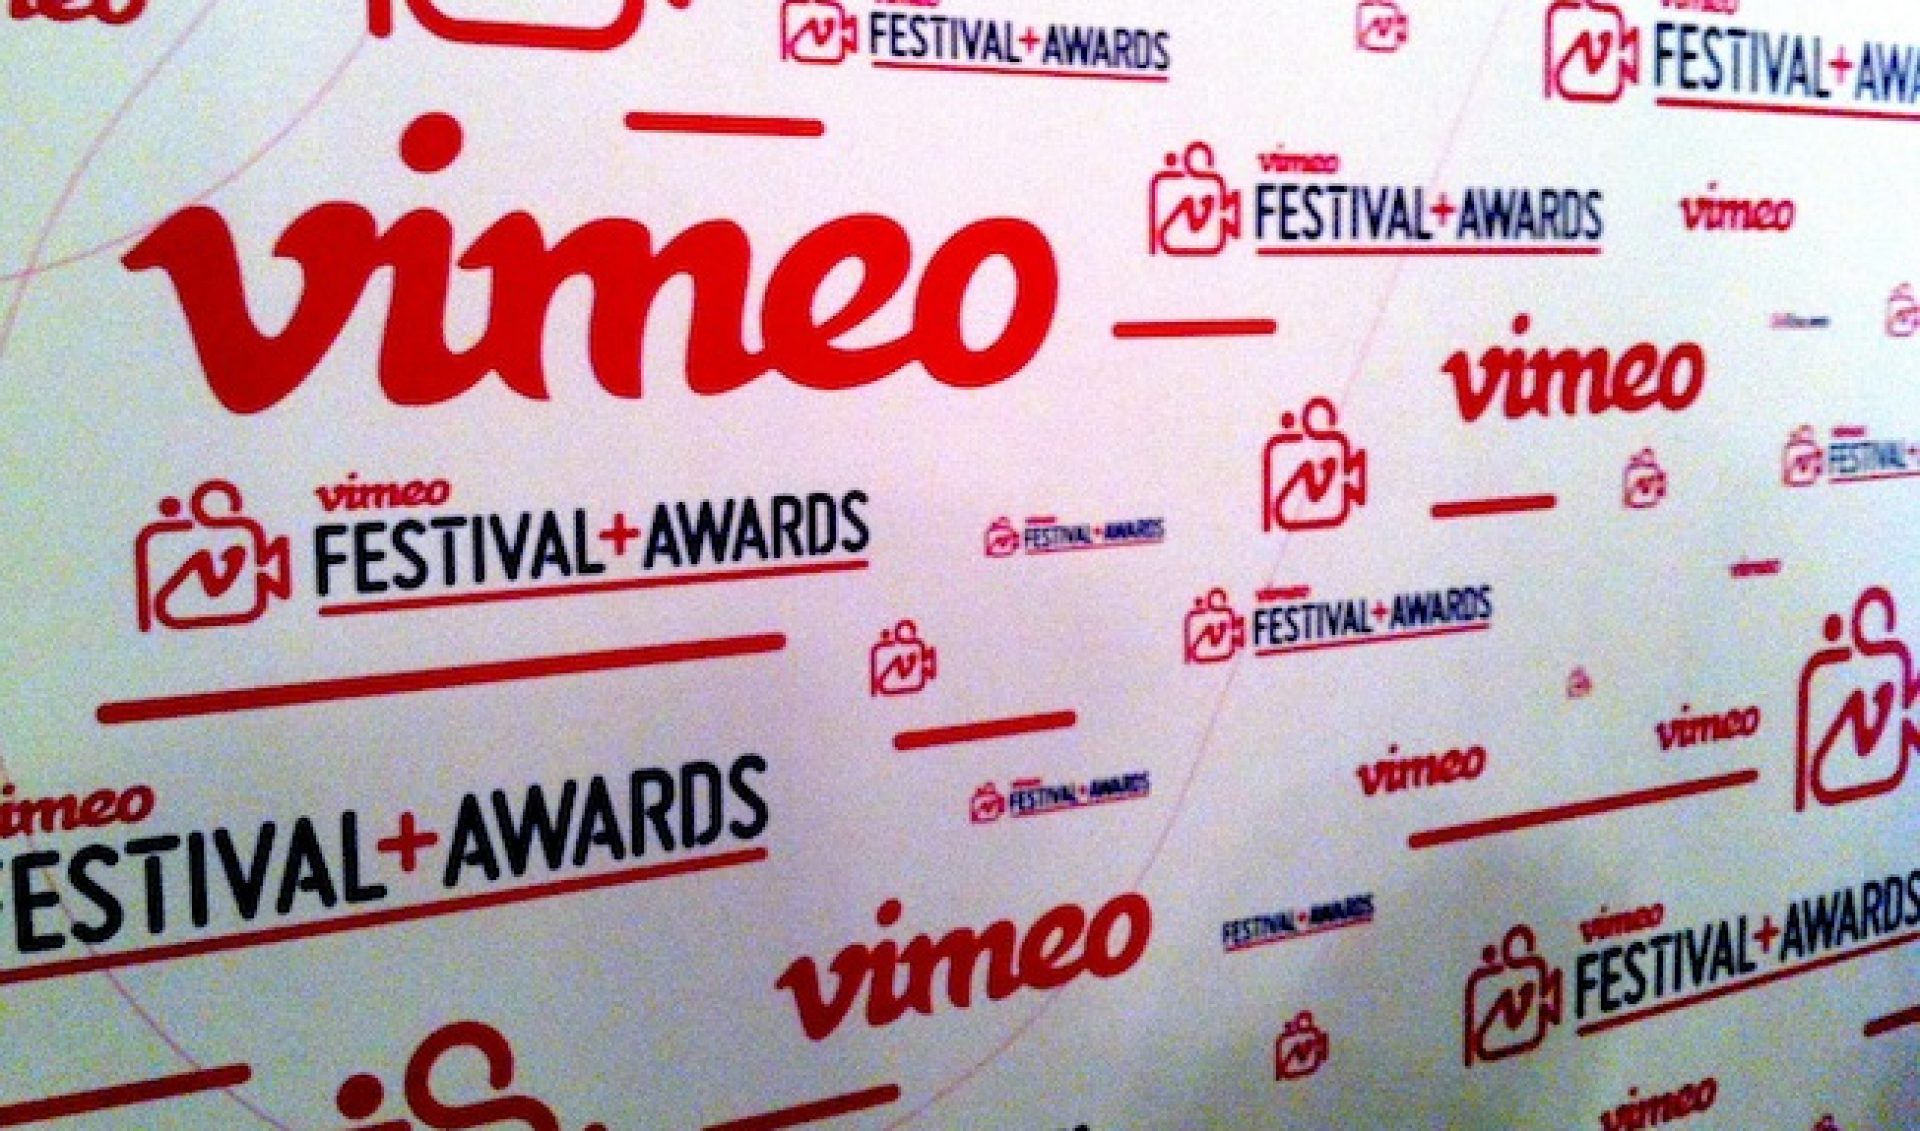 Kenny Powers, Vimeo, and the Importance of Online Video Awards